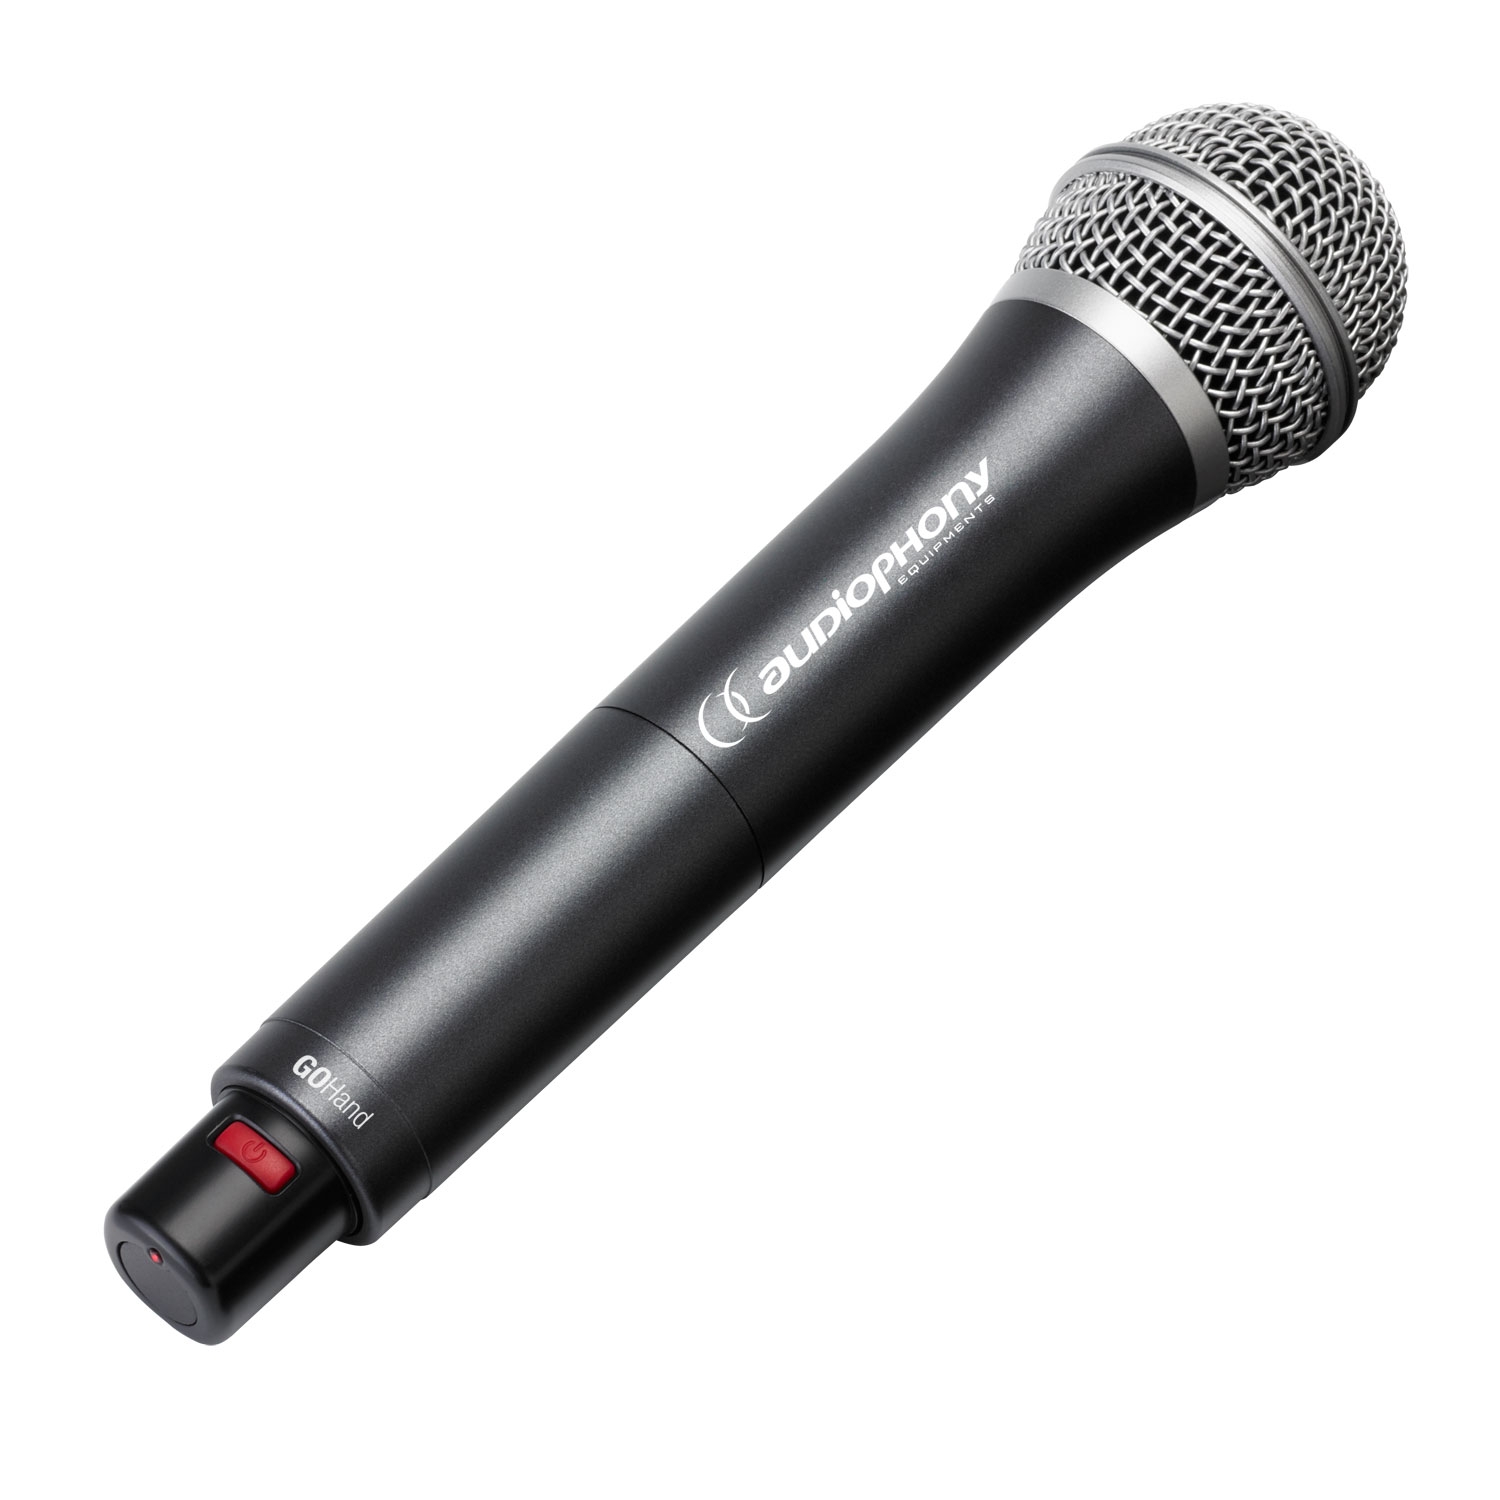 UHF handheld microphone 16 frequencies with condenser cell - 500MHz range